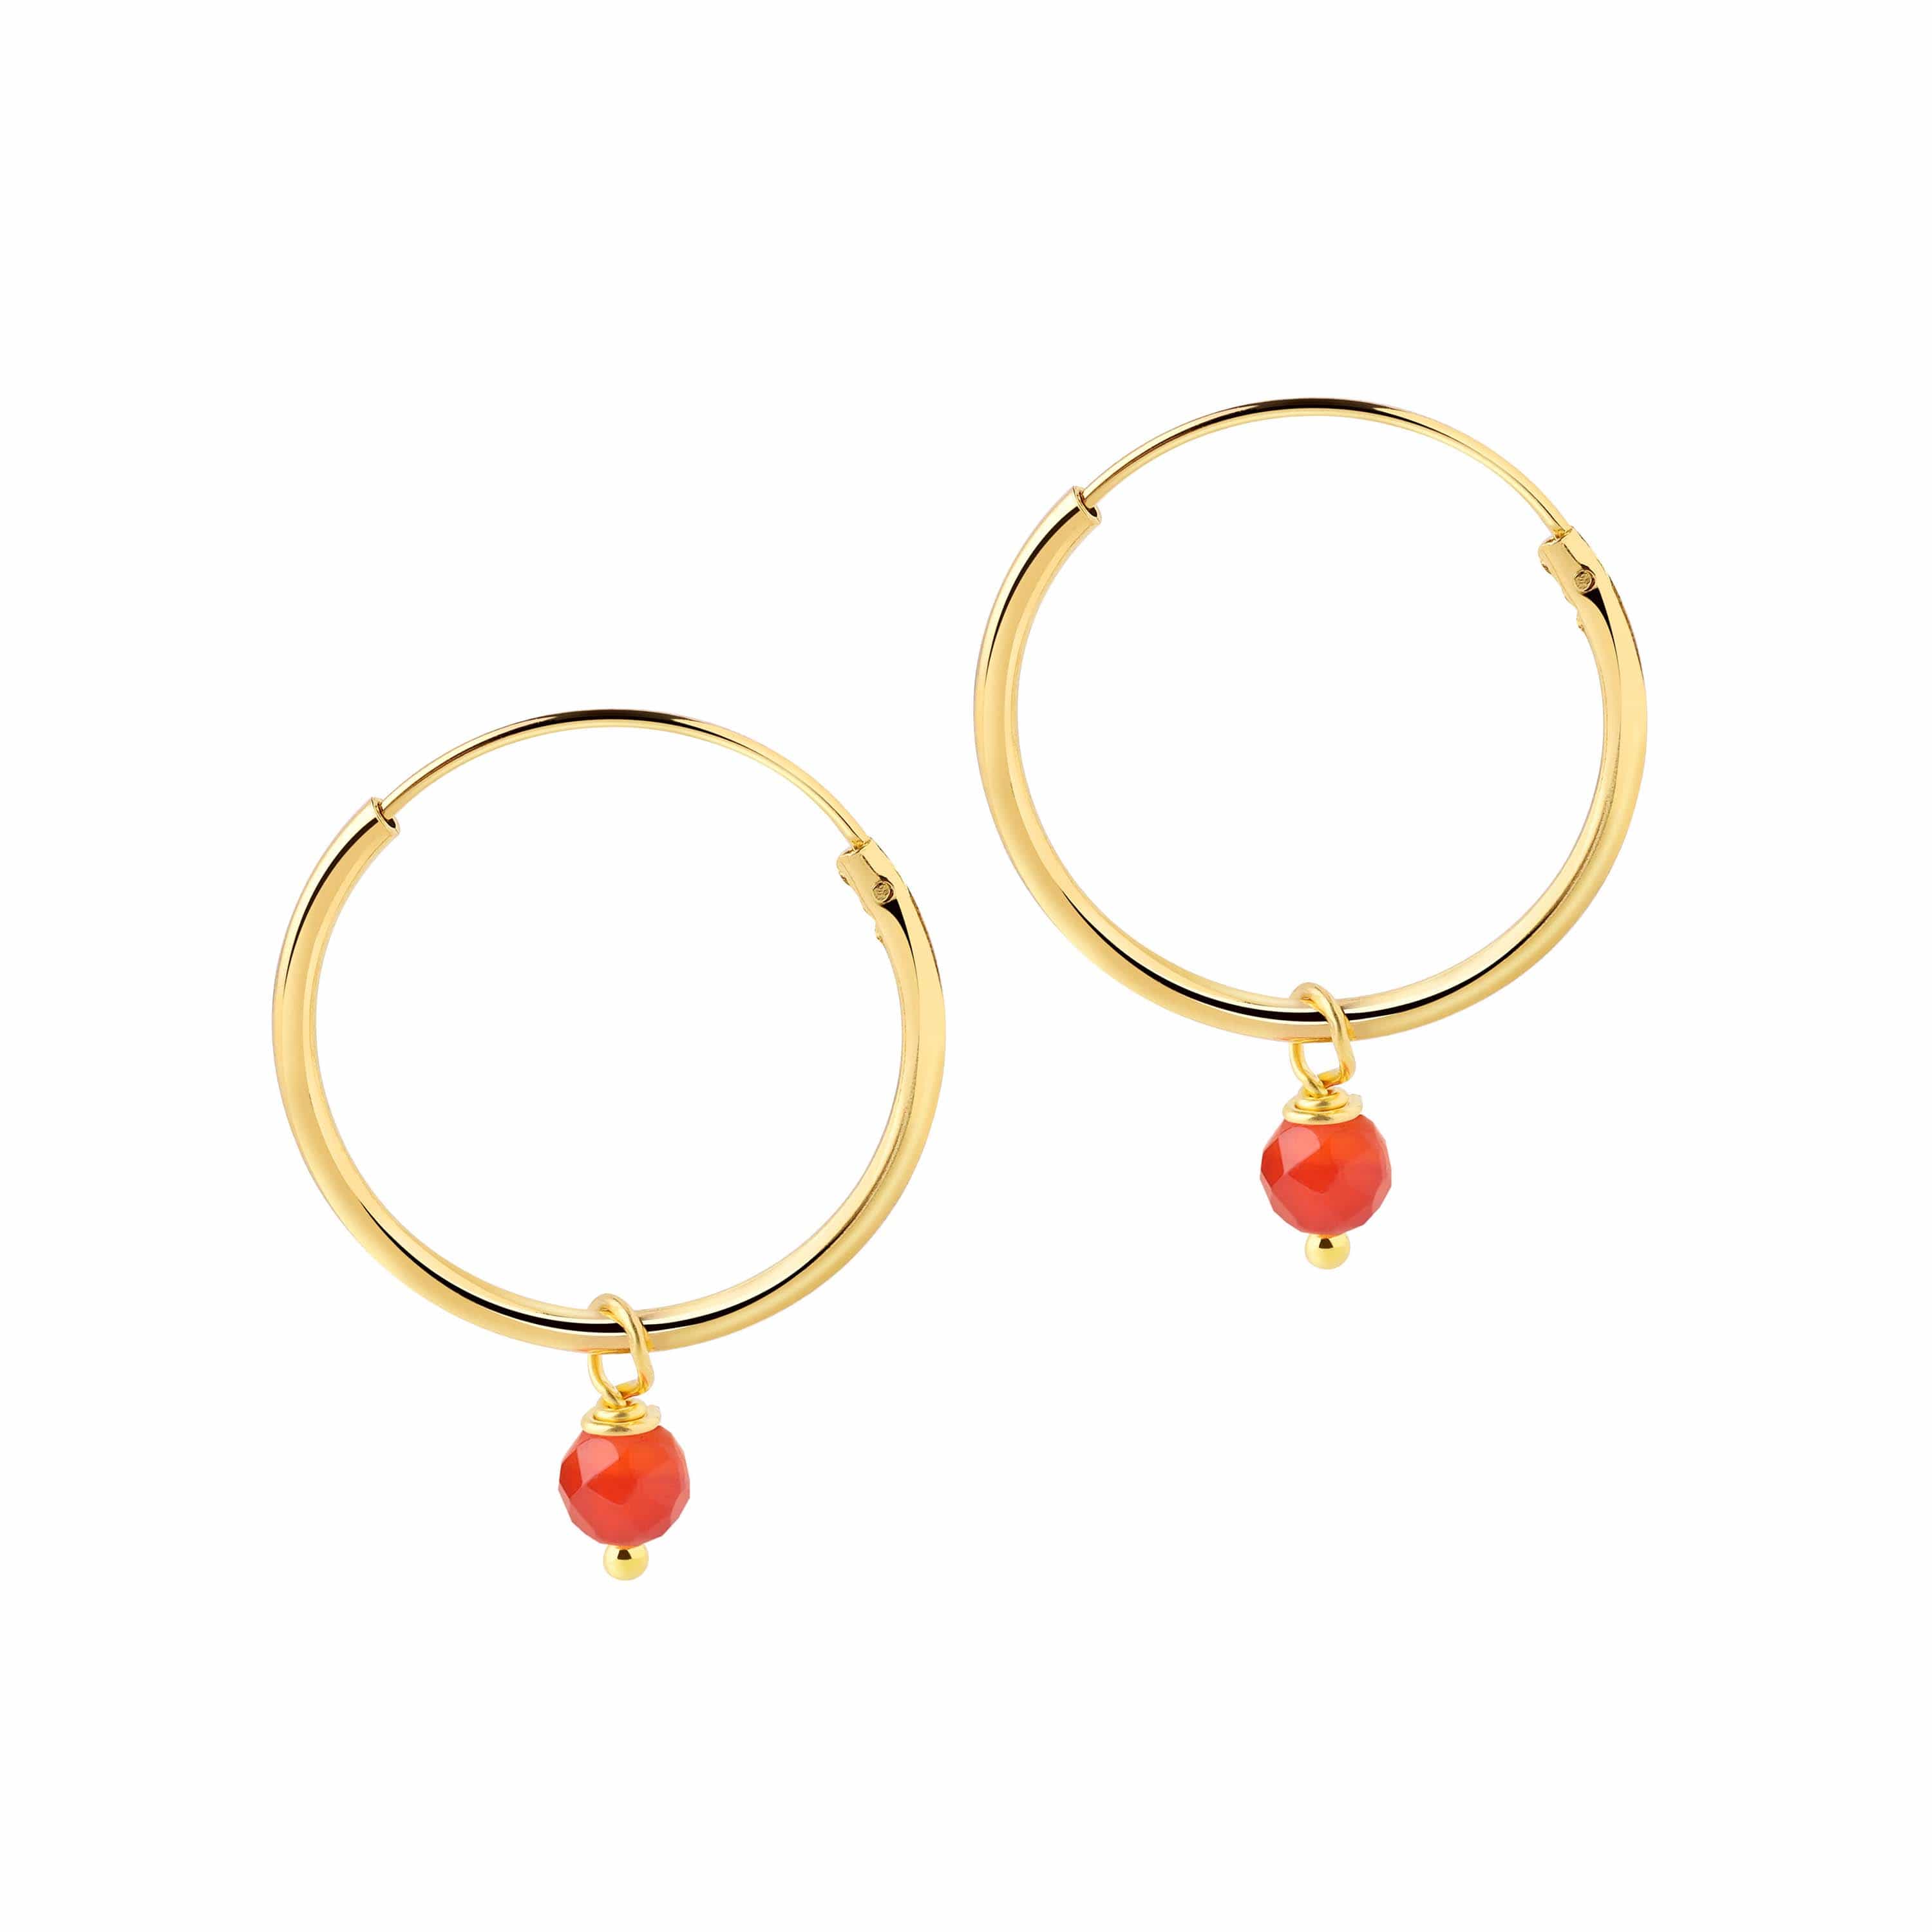 Gold Plated Hoop Earrings with Red Stone